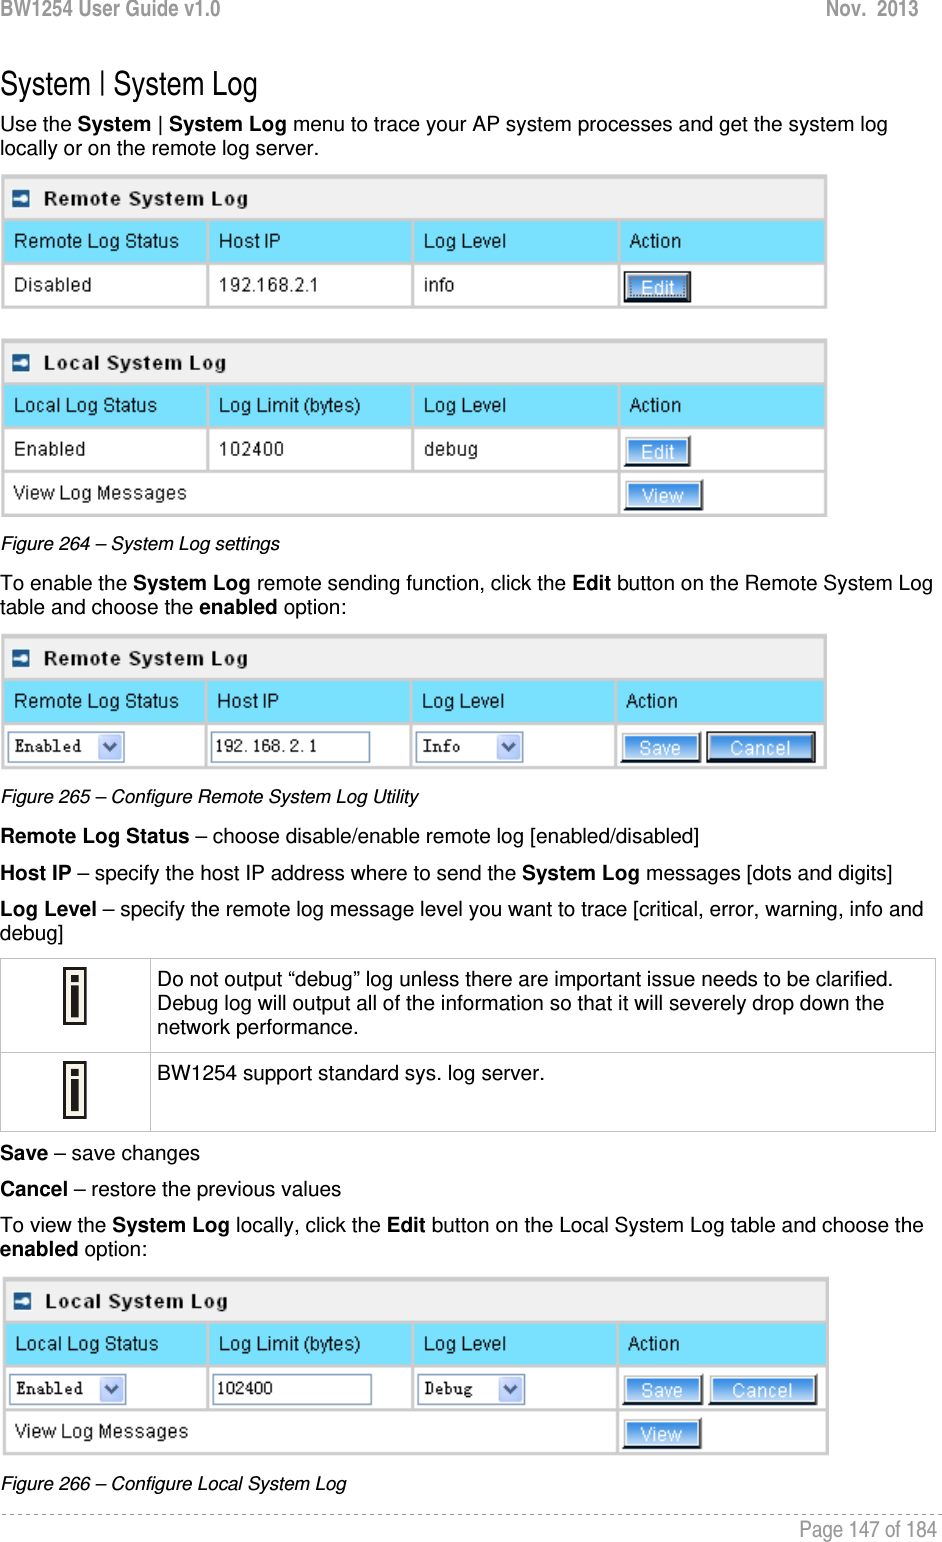 BW1254 User Guide v1.0  Nov.  2013     Page 147 of 184   System | System Log Use the System | System Log menu to trace your AP system processes and get the system log locally or on the remote log server.   Figure 264 – System Log settings To enable the System Log remote sending function, click the Edit button on the Remote System Log table and choose the enabled option:  Figure 265 – Configure Remote System Log Utility Remote Log Status – choose disable/enable remote log [enabled/disabled] Host IP – specify the host IP address where to send the System Log messages [dots and digits] Log Level – specify the remote log message level you want to trace [critical, error, warning, info and debug]  Do not output “debug” log unless there are important issue needs to be clarified. Debug log will output all of the information so that it will severely drop down the network performance.  BW1254 support standard sys. log server. Save – save changes Cancel – restore the previous values To view the System Log locally, click the Edit button on the Local System Log table and choose the enabled option:  Figure 266 – Configure Local System Log 